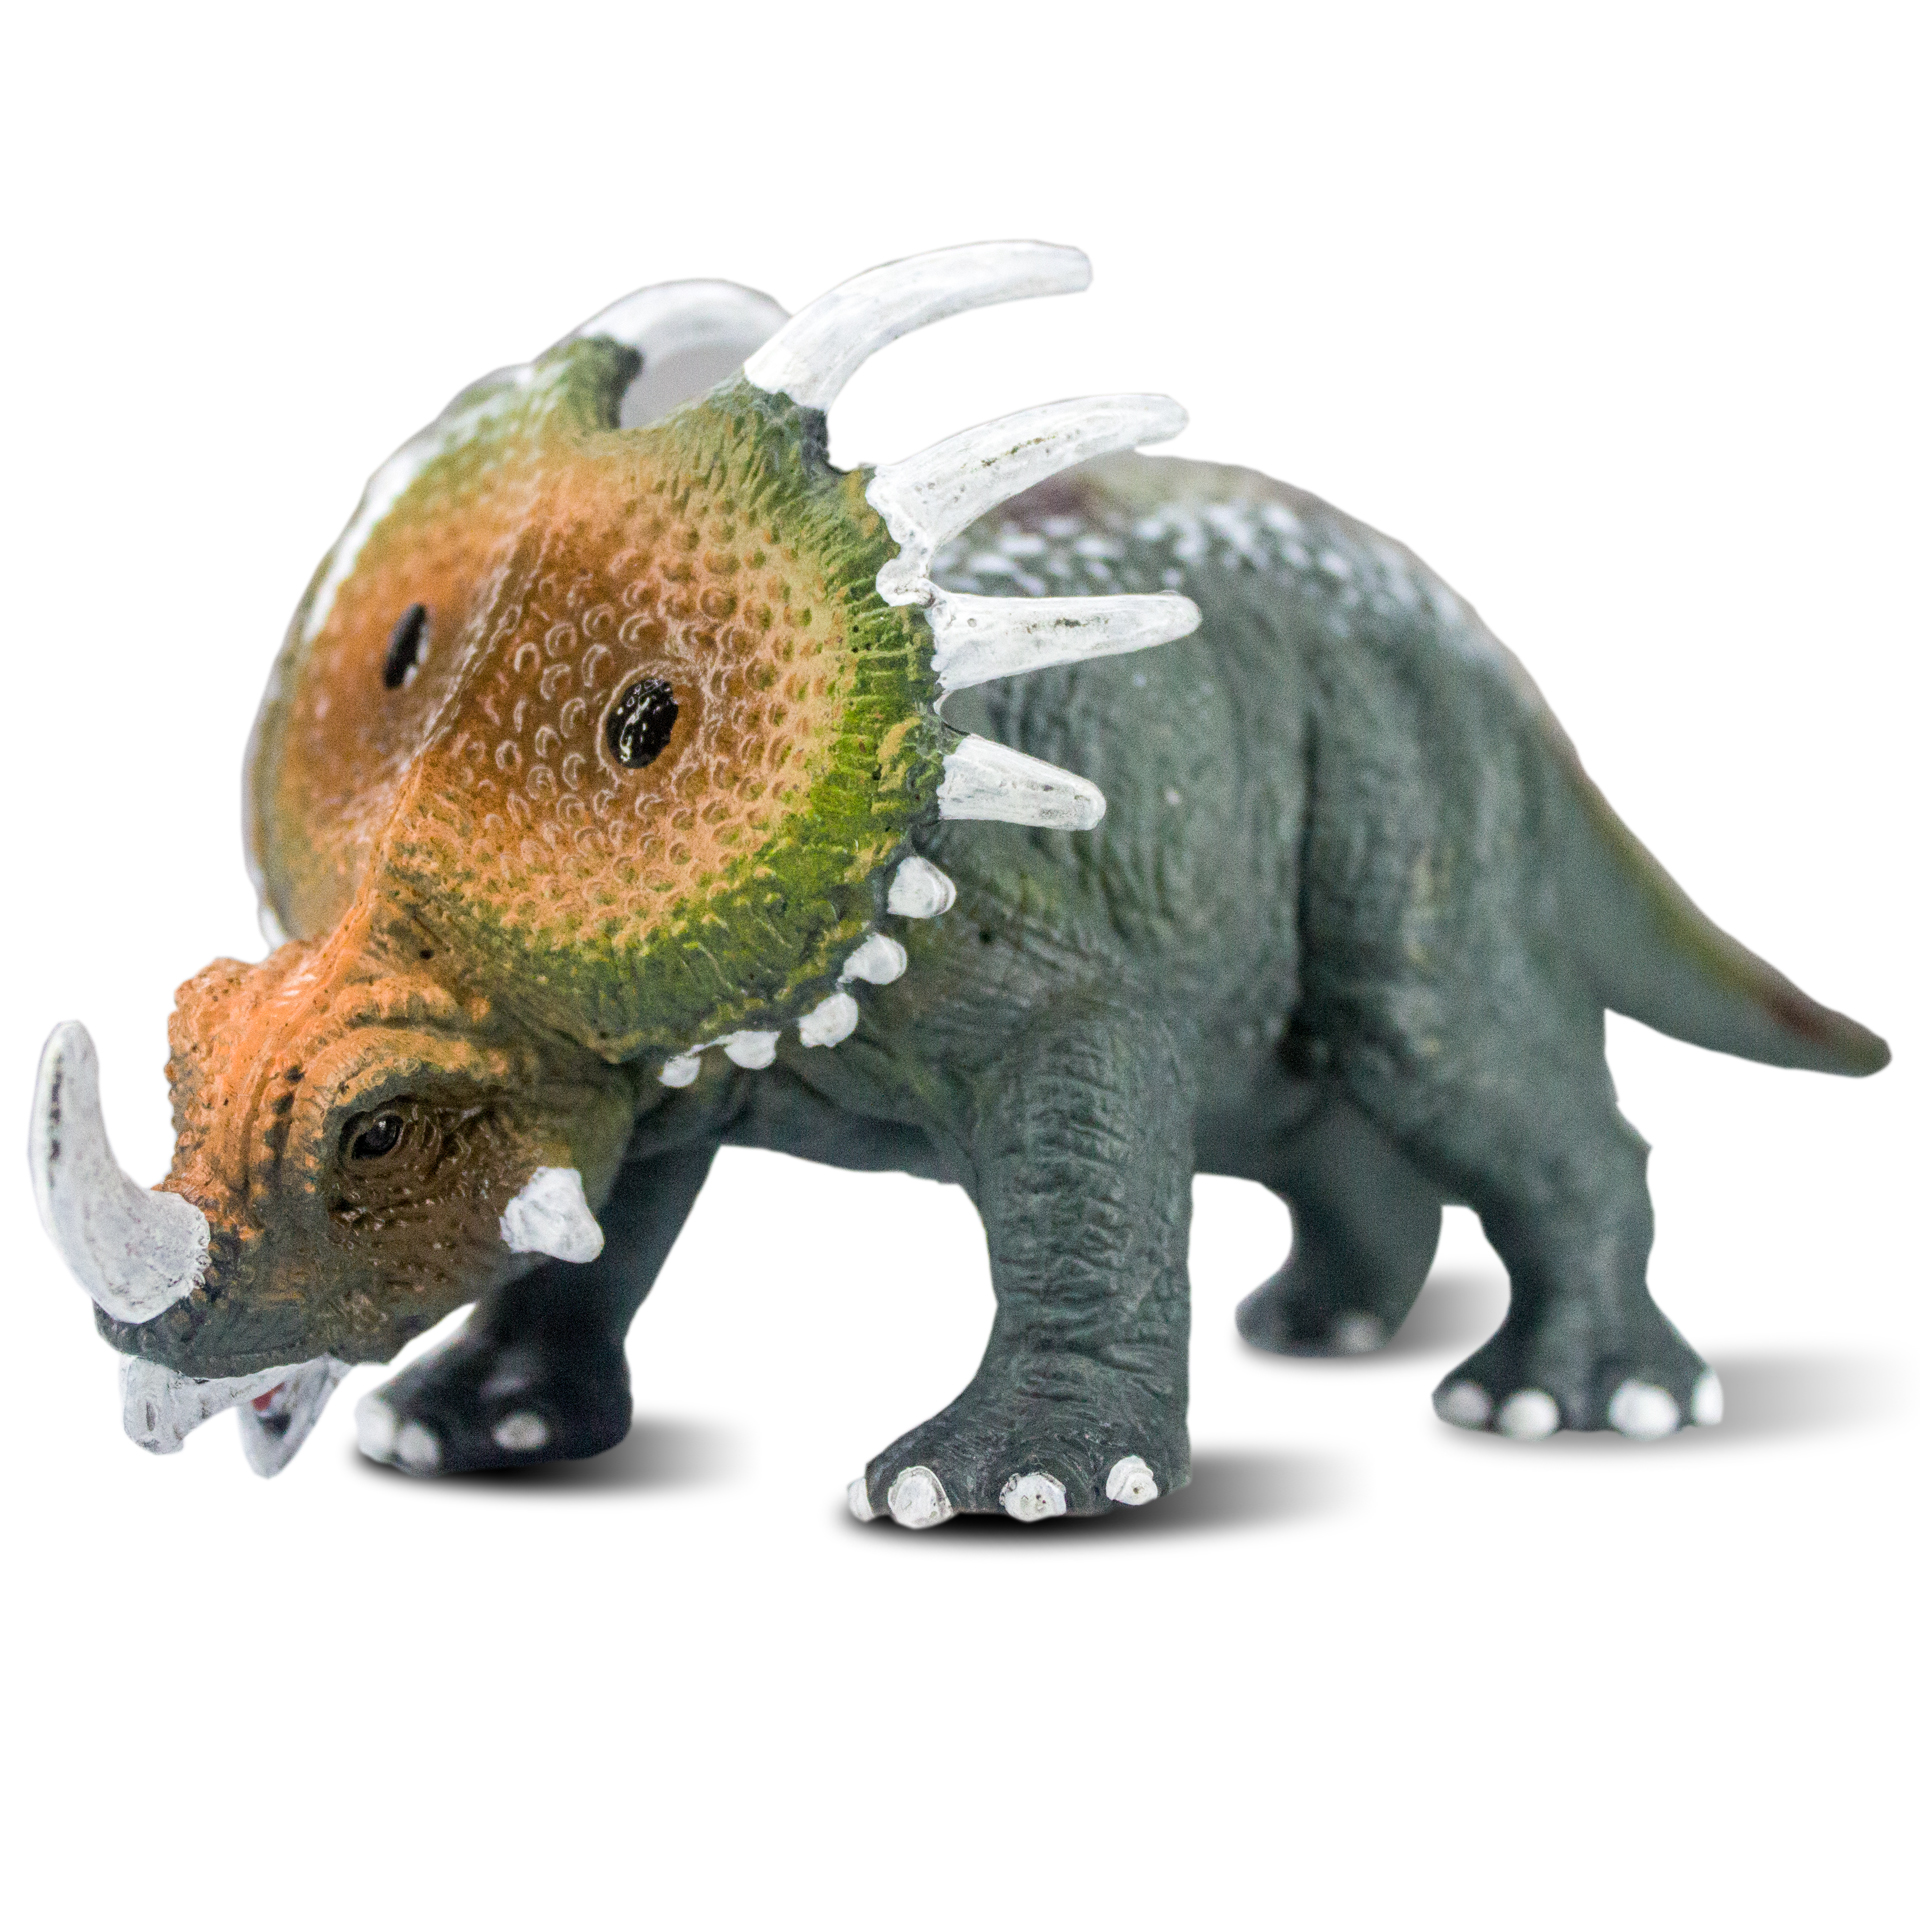 Geoworld Dinoart Painting Kit - Styracosaurus - Dinoart Painting Kit -  Styracosaurus . Buy Styracosaurus toys in India. shop for Geoworld products  in India. Toys for 3 - 15 Years Kids.